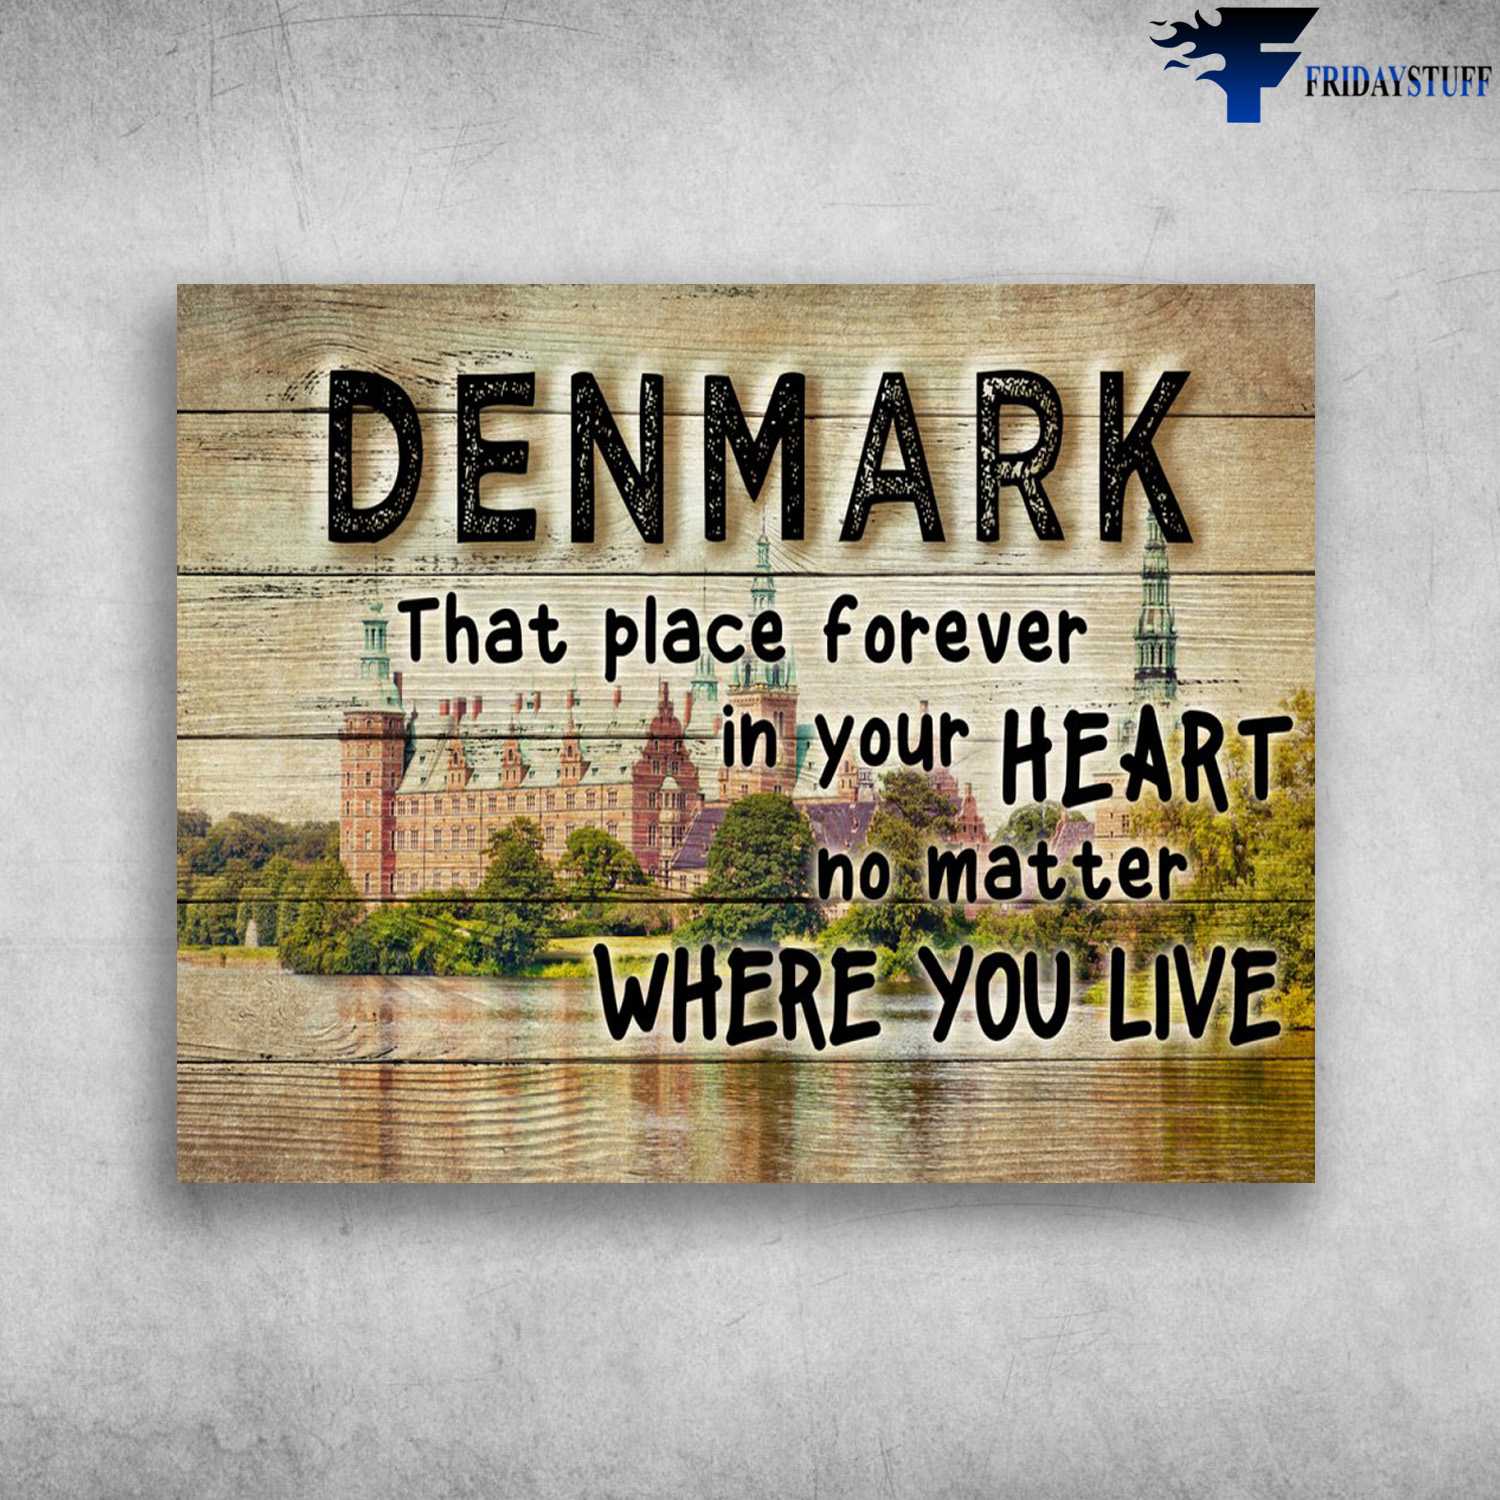 Demark Poster, Demark That Place Forever In Your Heart, No Matter Where You Live